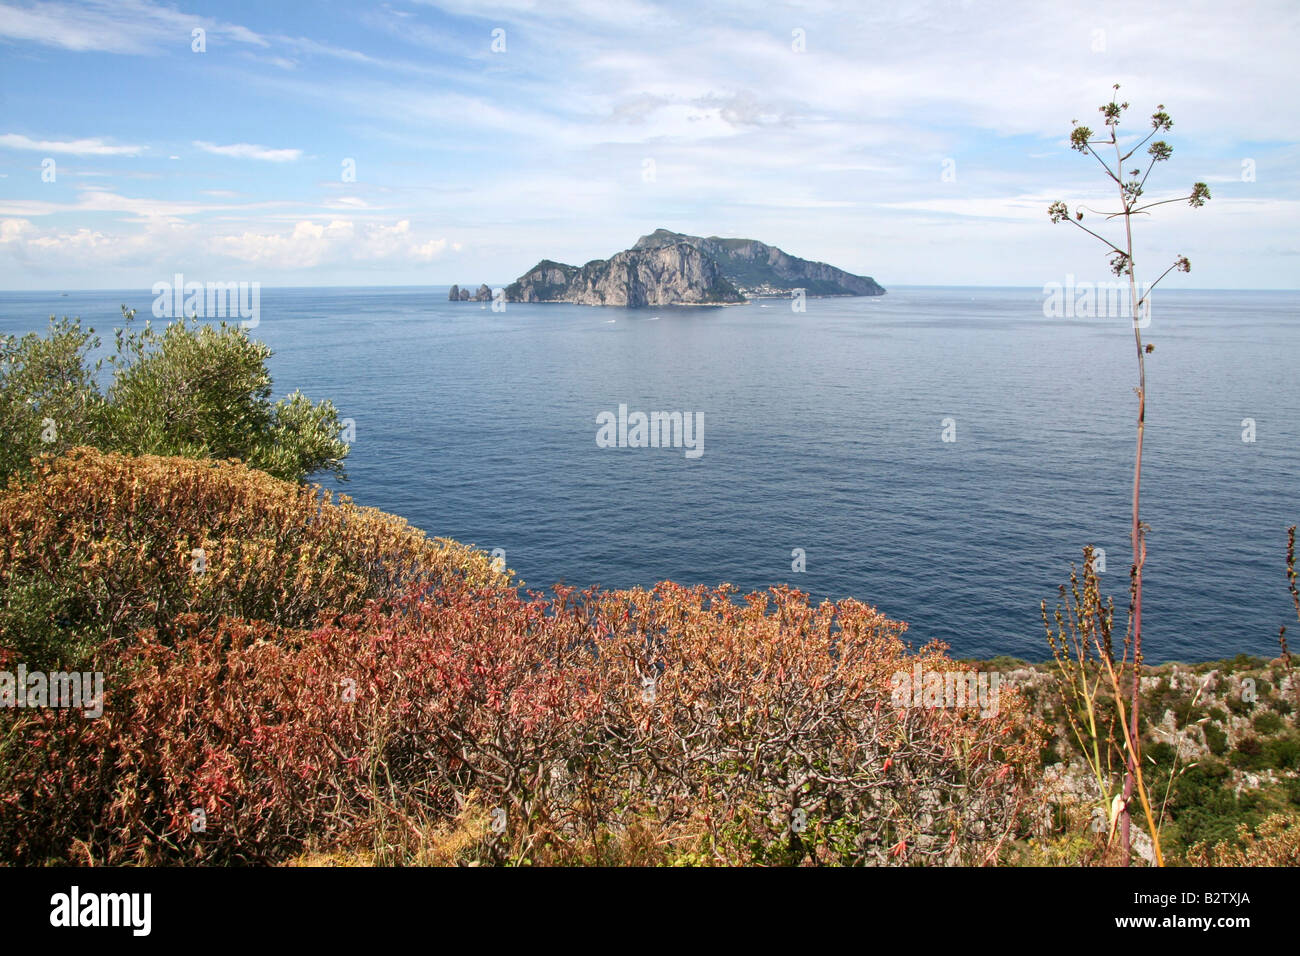 The island of Capri as seen from Punta Campanella, the extreme extension of the Sorrento Peninsula (Amalfi Coast) in Italy Stock Photo